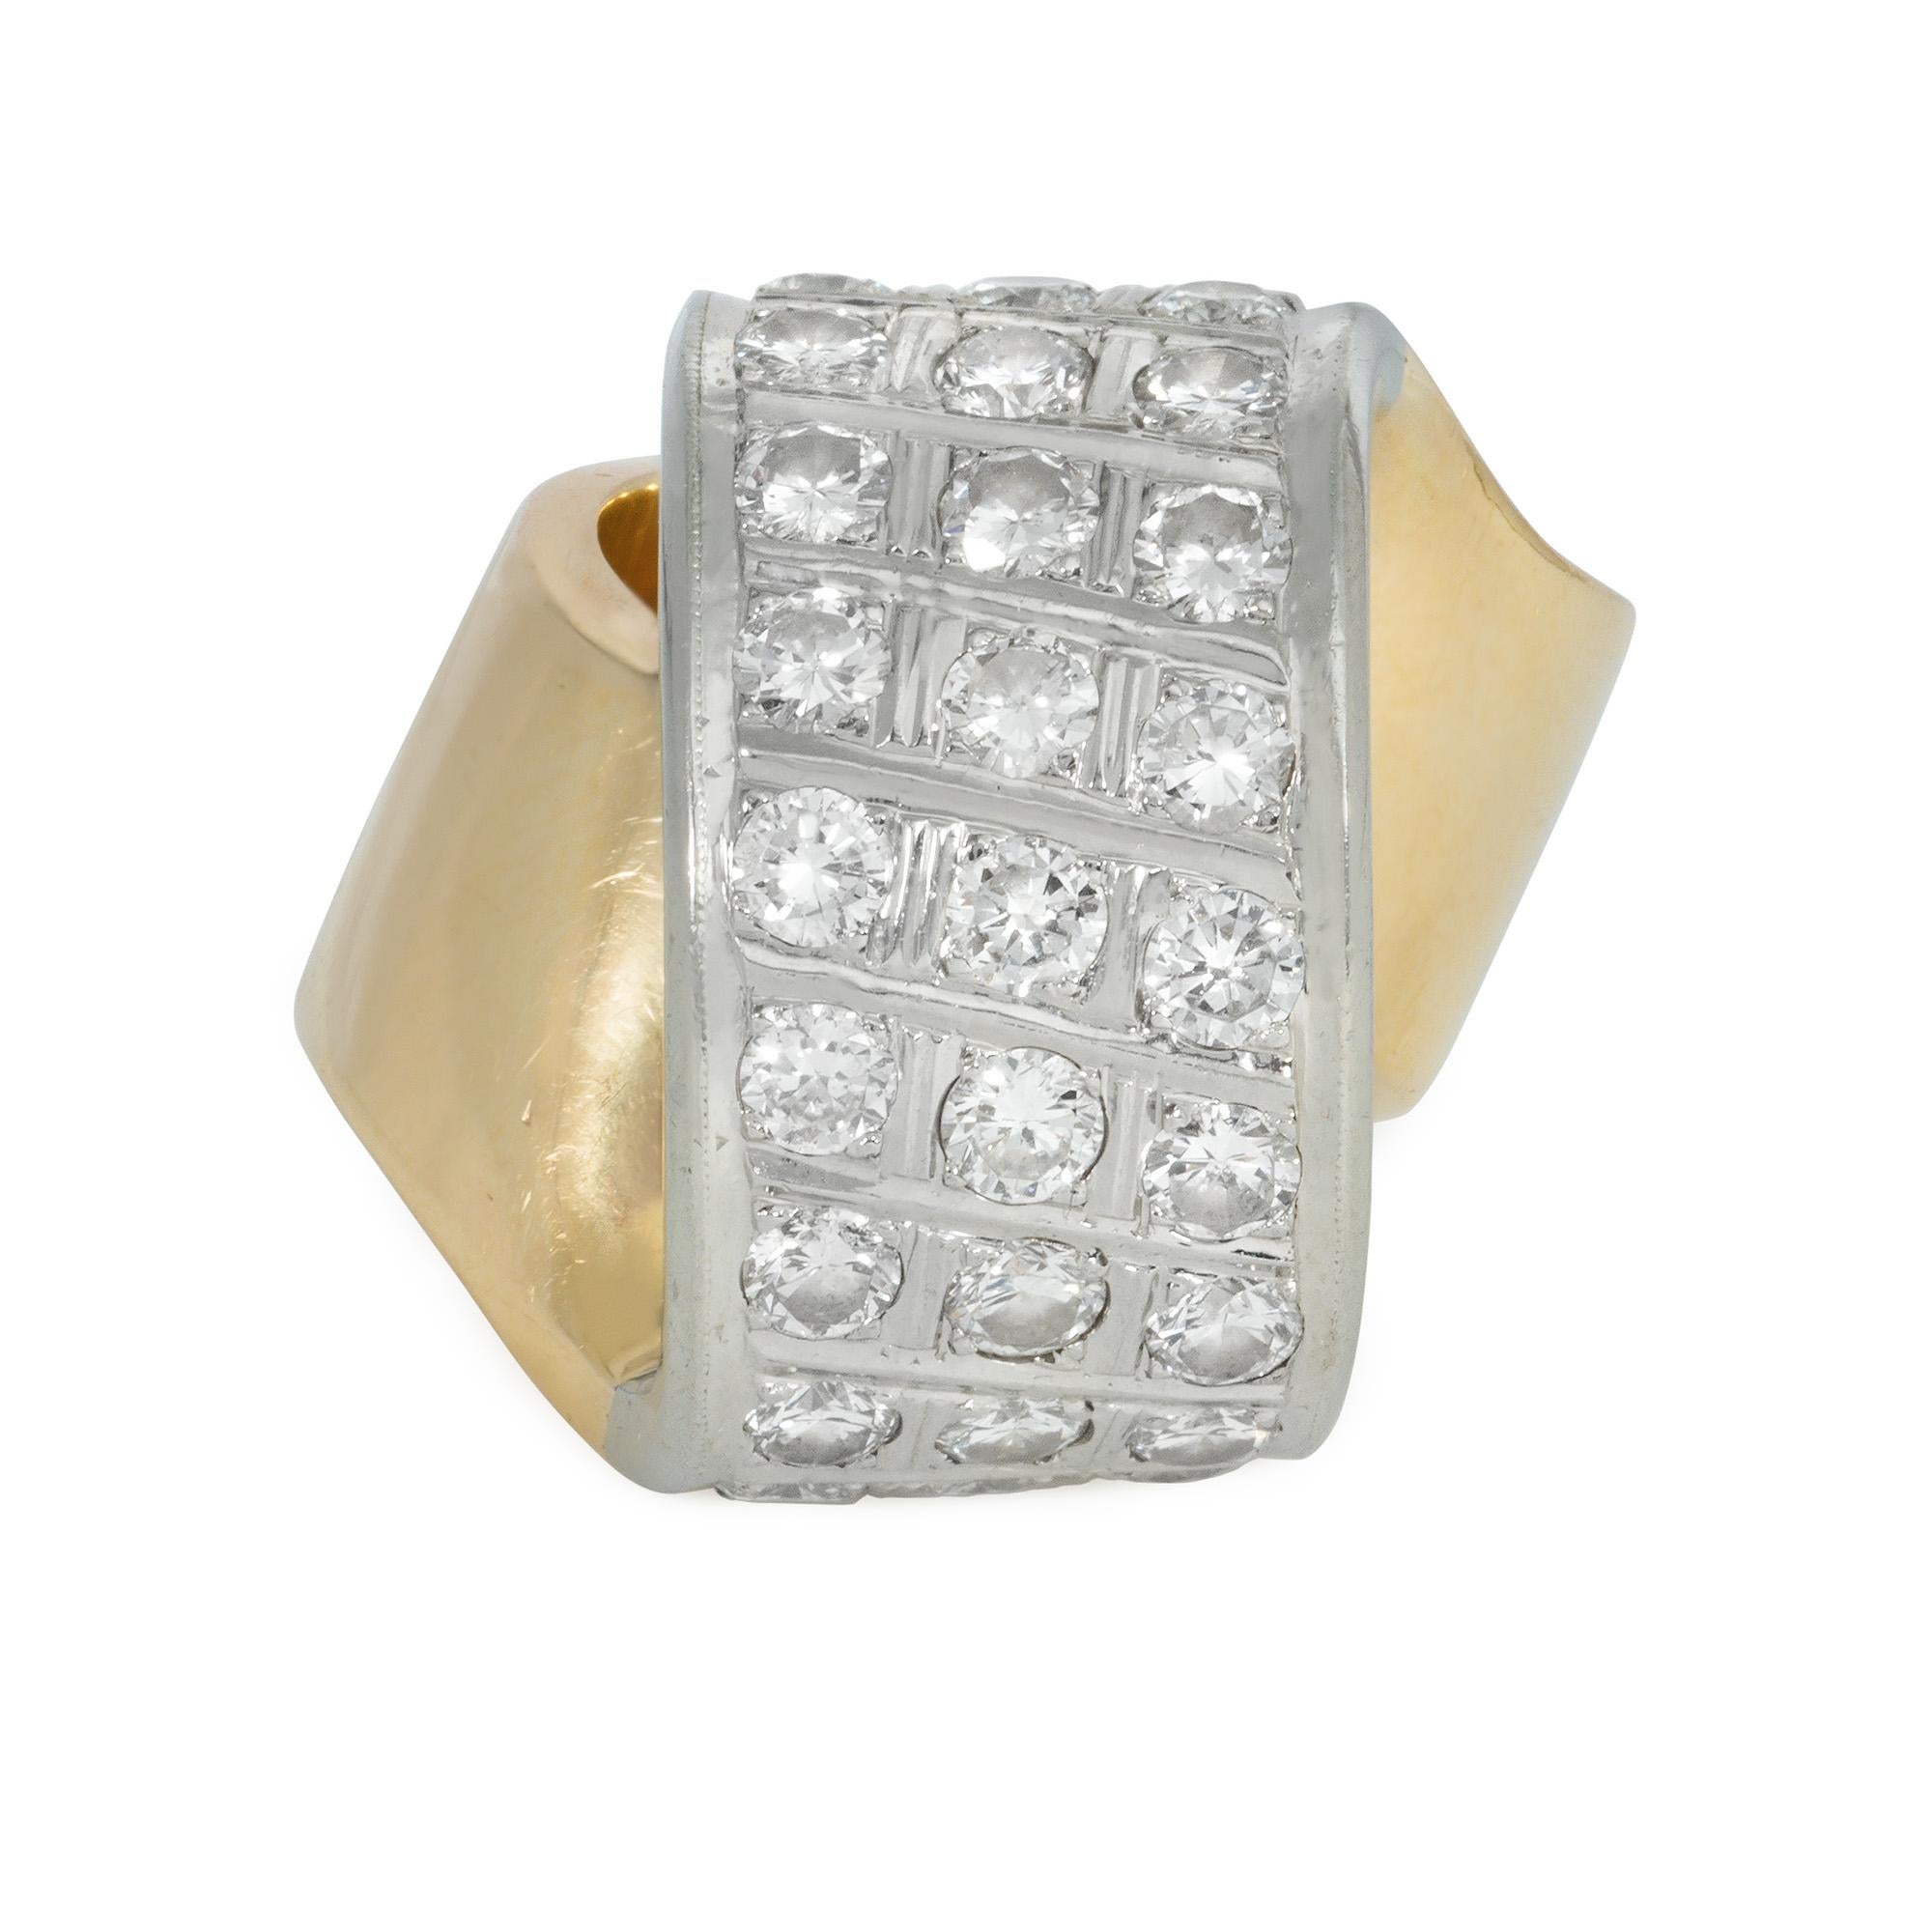 A Modernist two-color gold and diamond statement ring of stylized dimensional loop design, in 18k.  Atw diamonds 2.70 cts.

Face-up measurements of diamond segment: 1